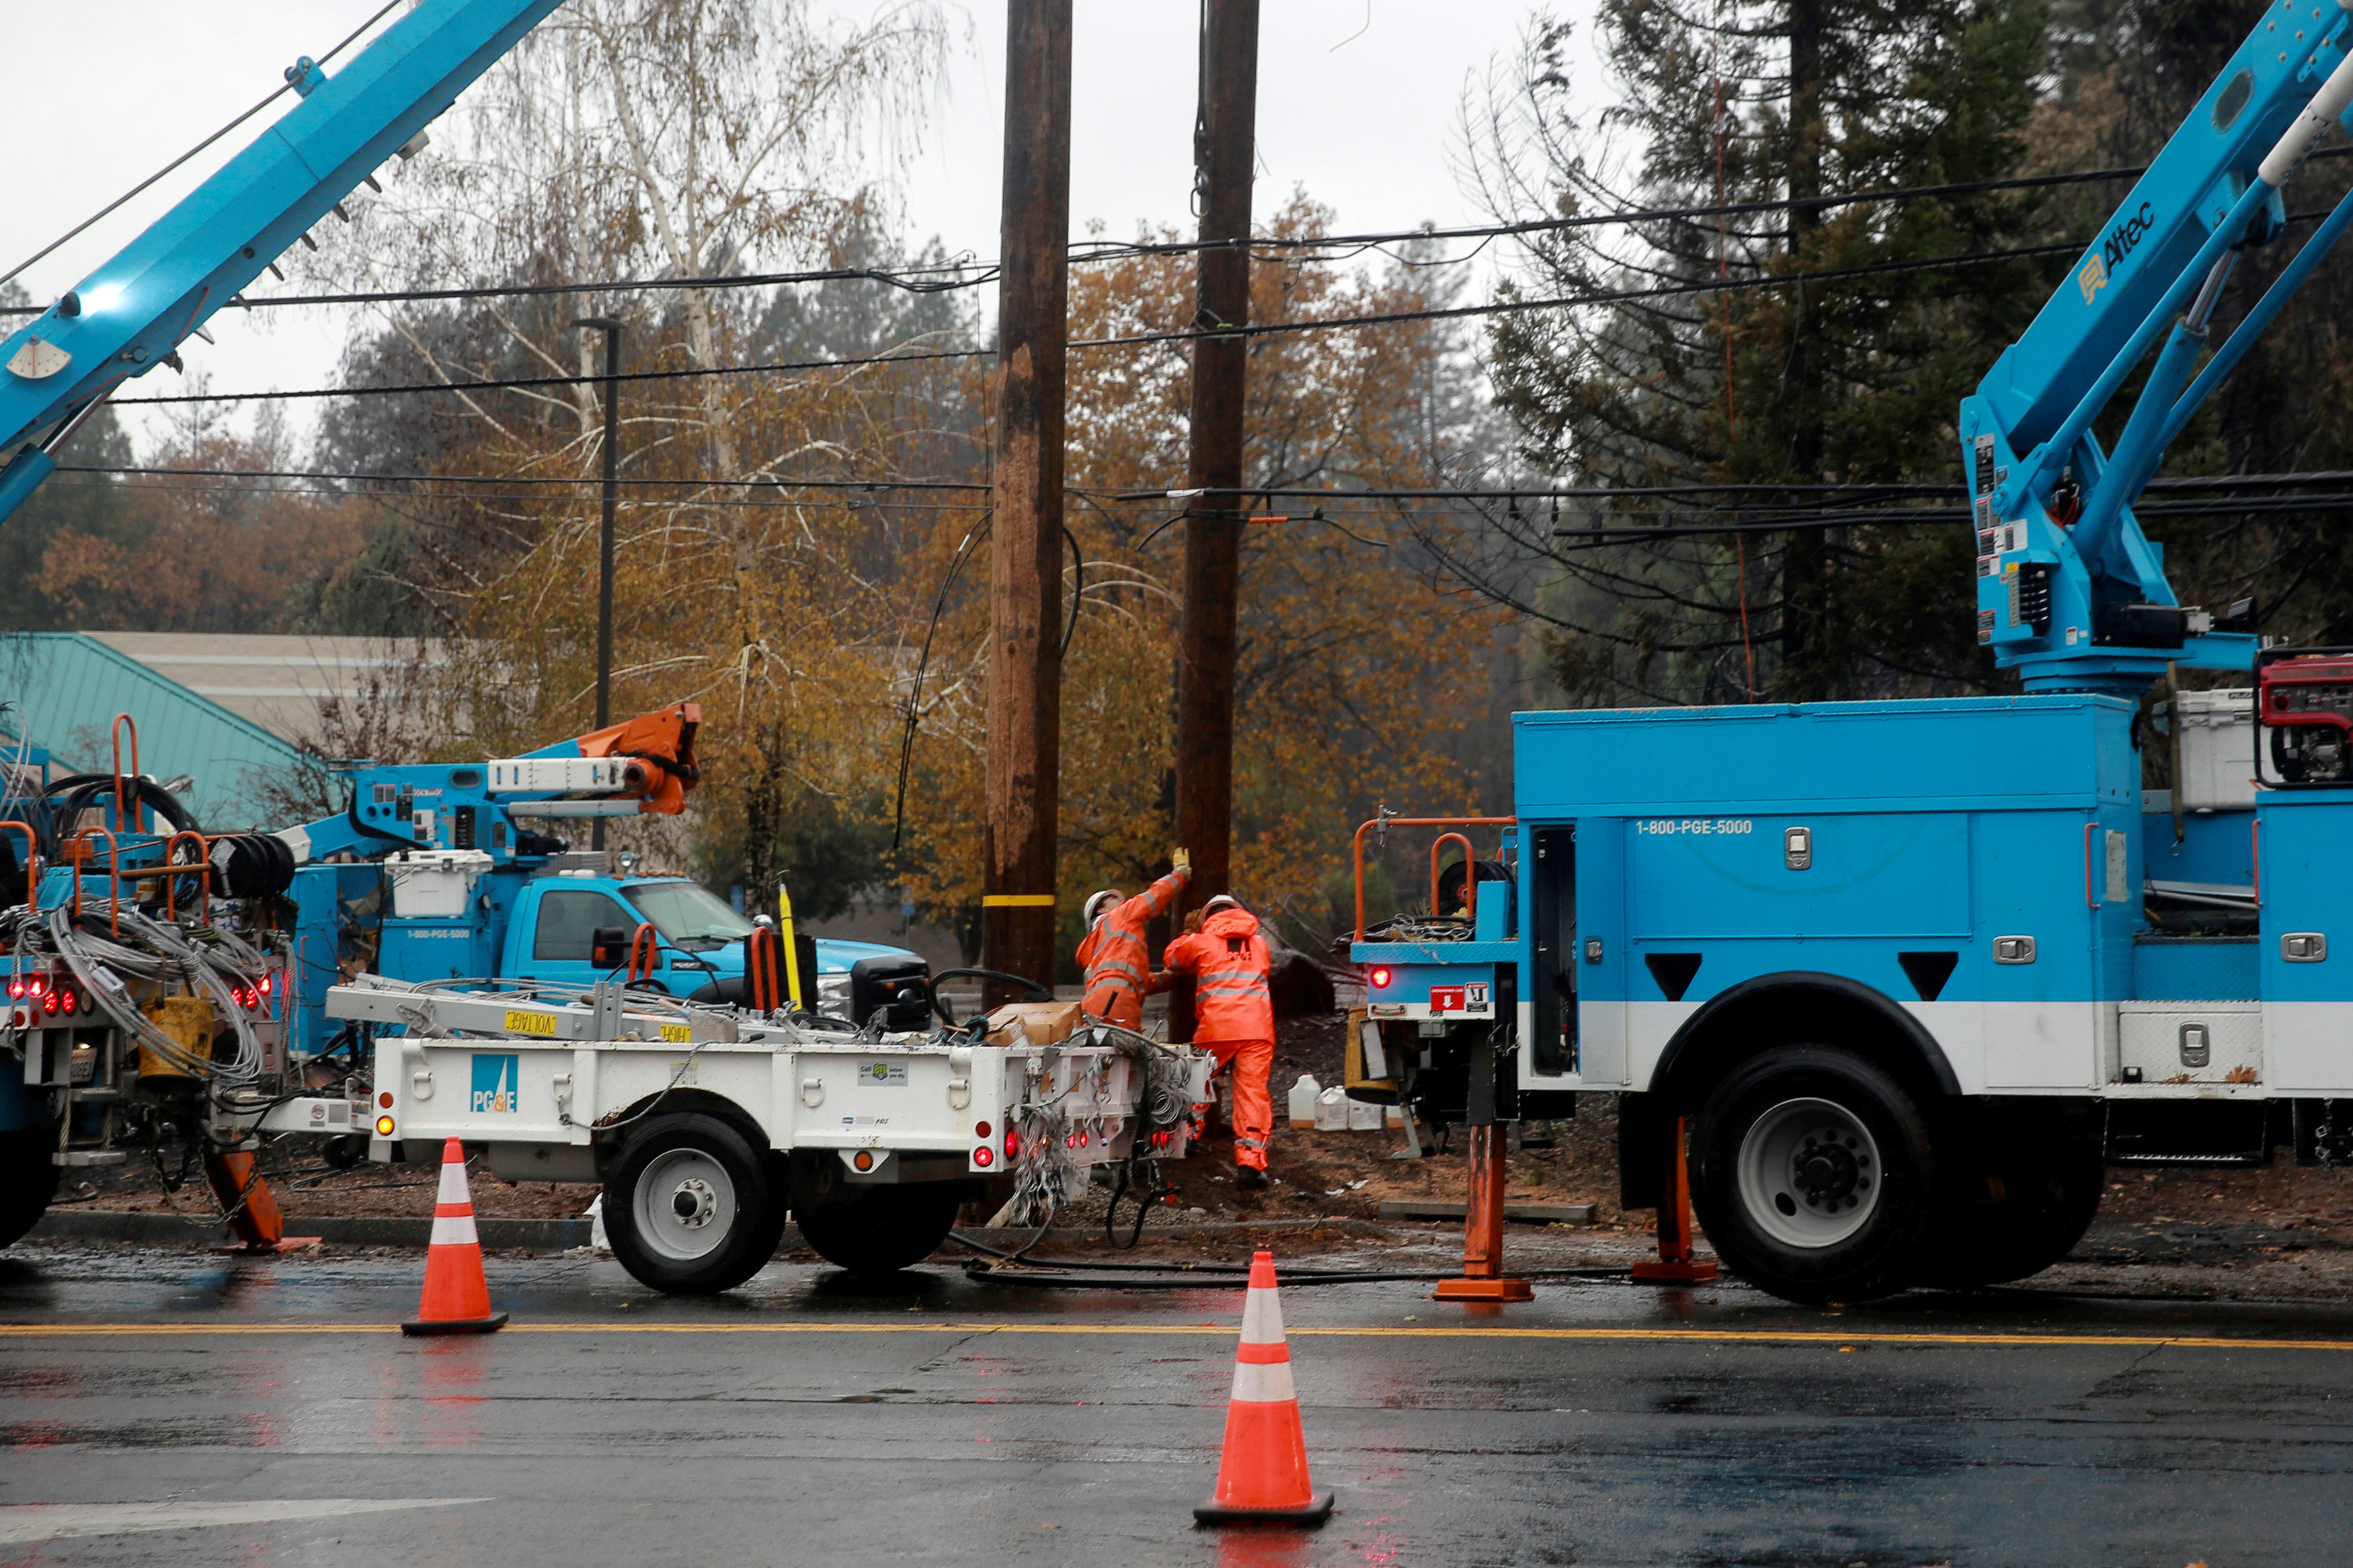 PG&E works on power lines to repair damage caused by the Camp Fire in Paradise, California, U.S. November 21, 2018. REUTERS/Elijah Nouvelage